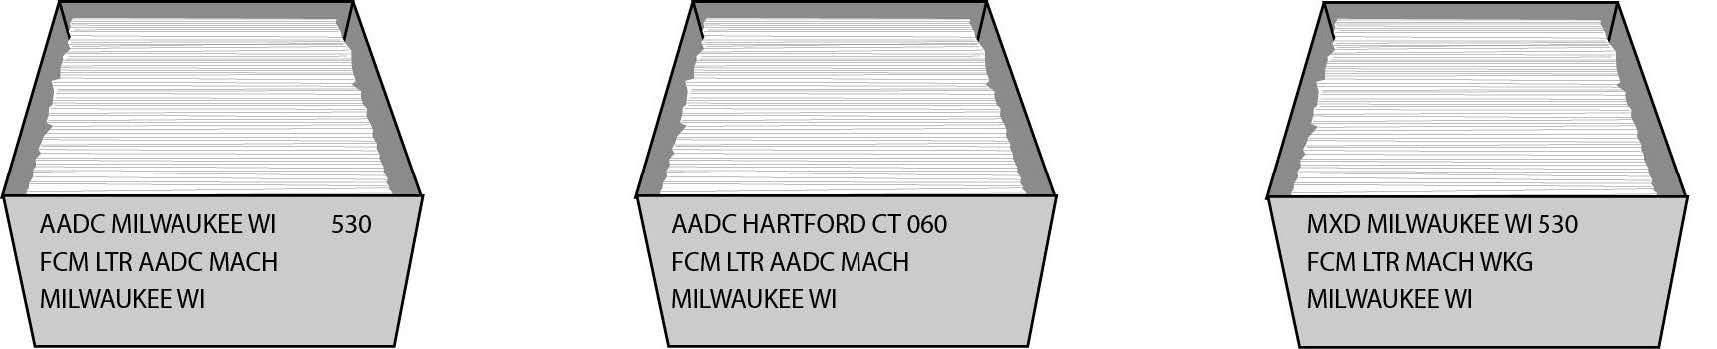 Traying sequence for first-class mail machinable letters and postcards.